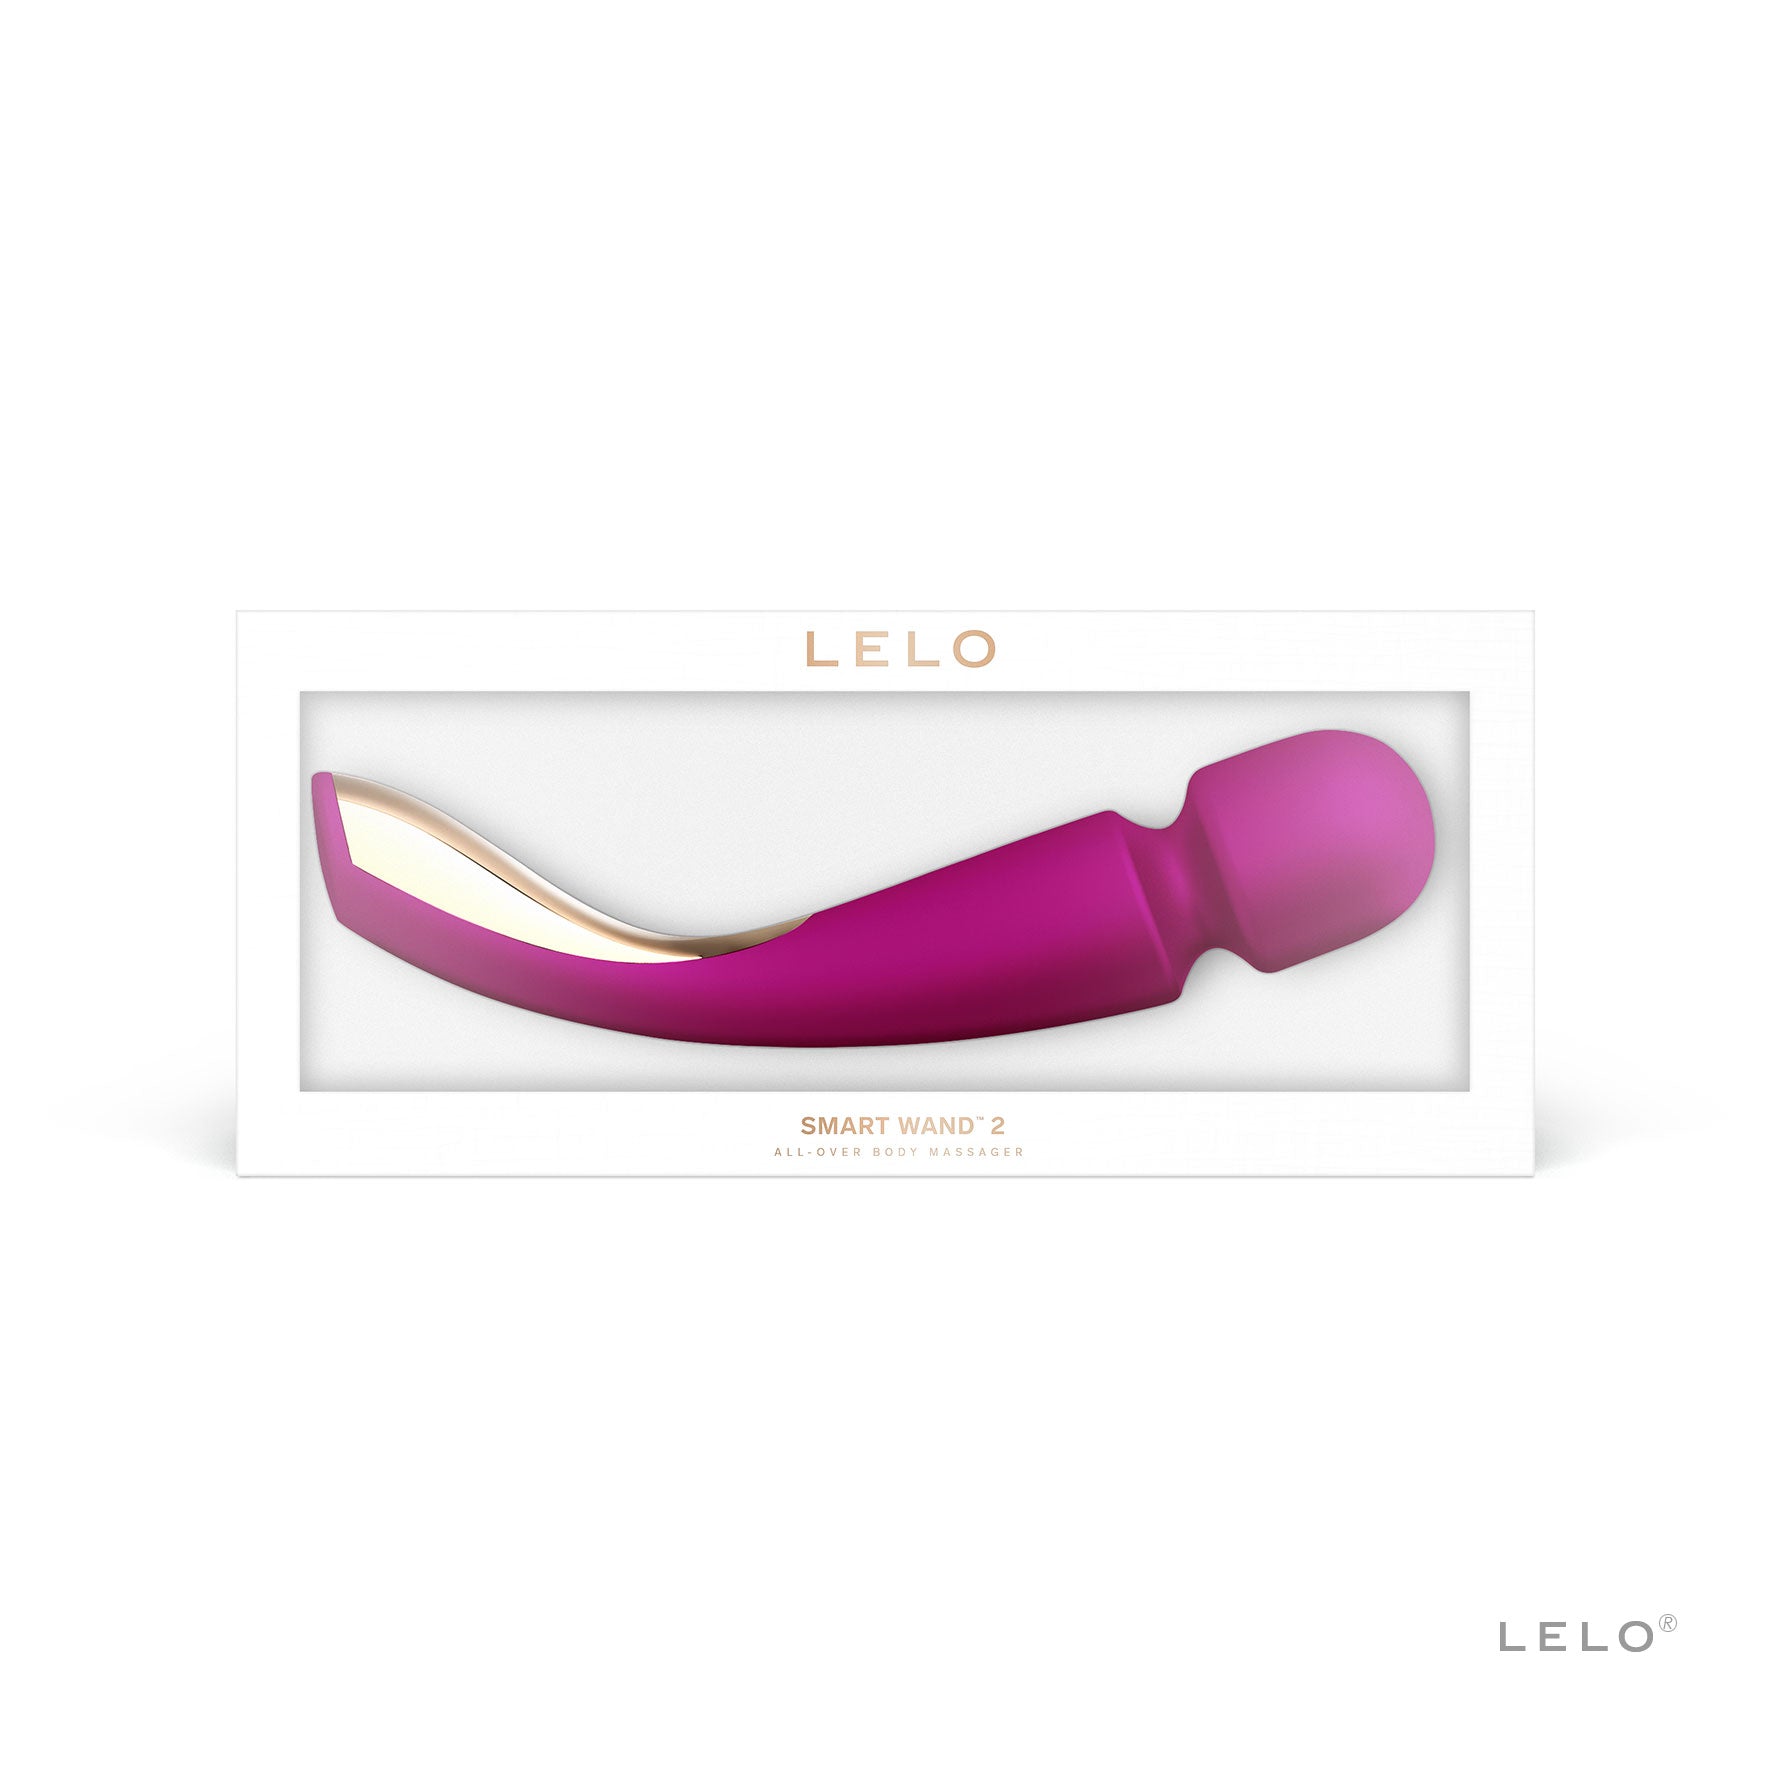 LELO Smart wand 2 Deep Rose Color-Large wand massager shown in display packaging